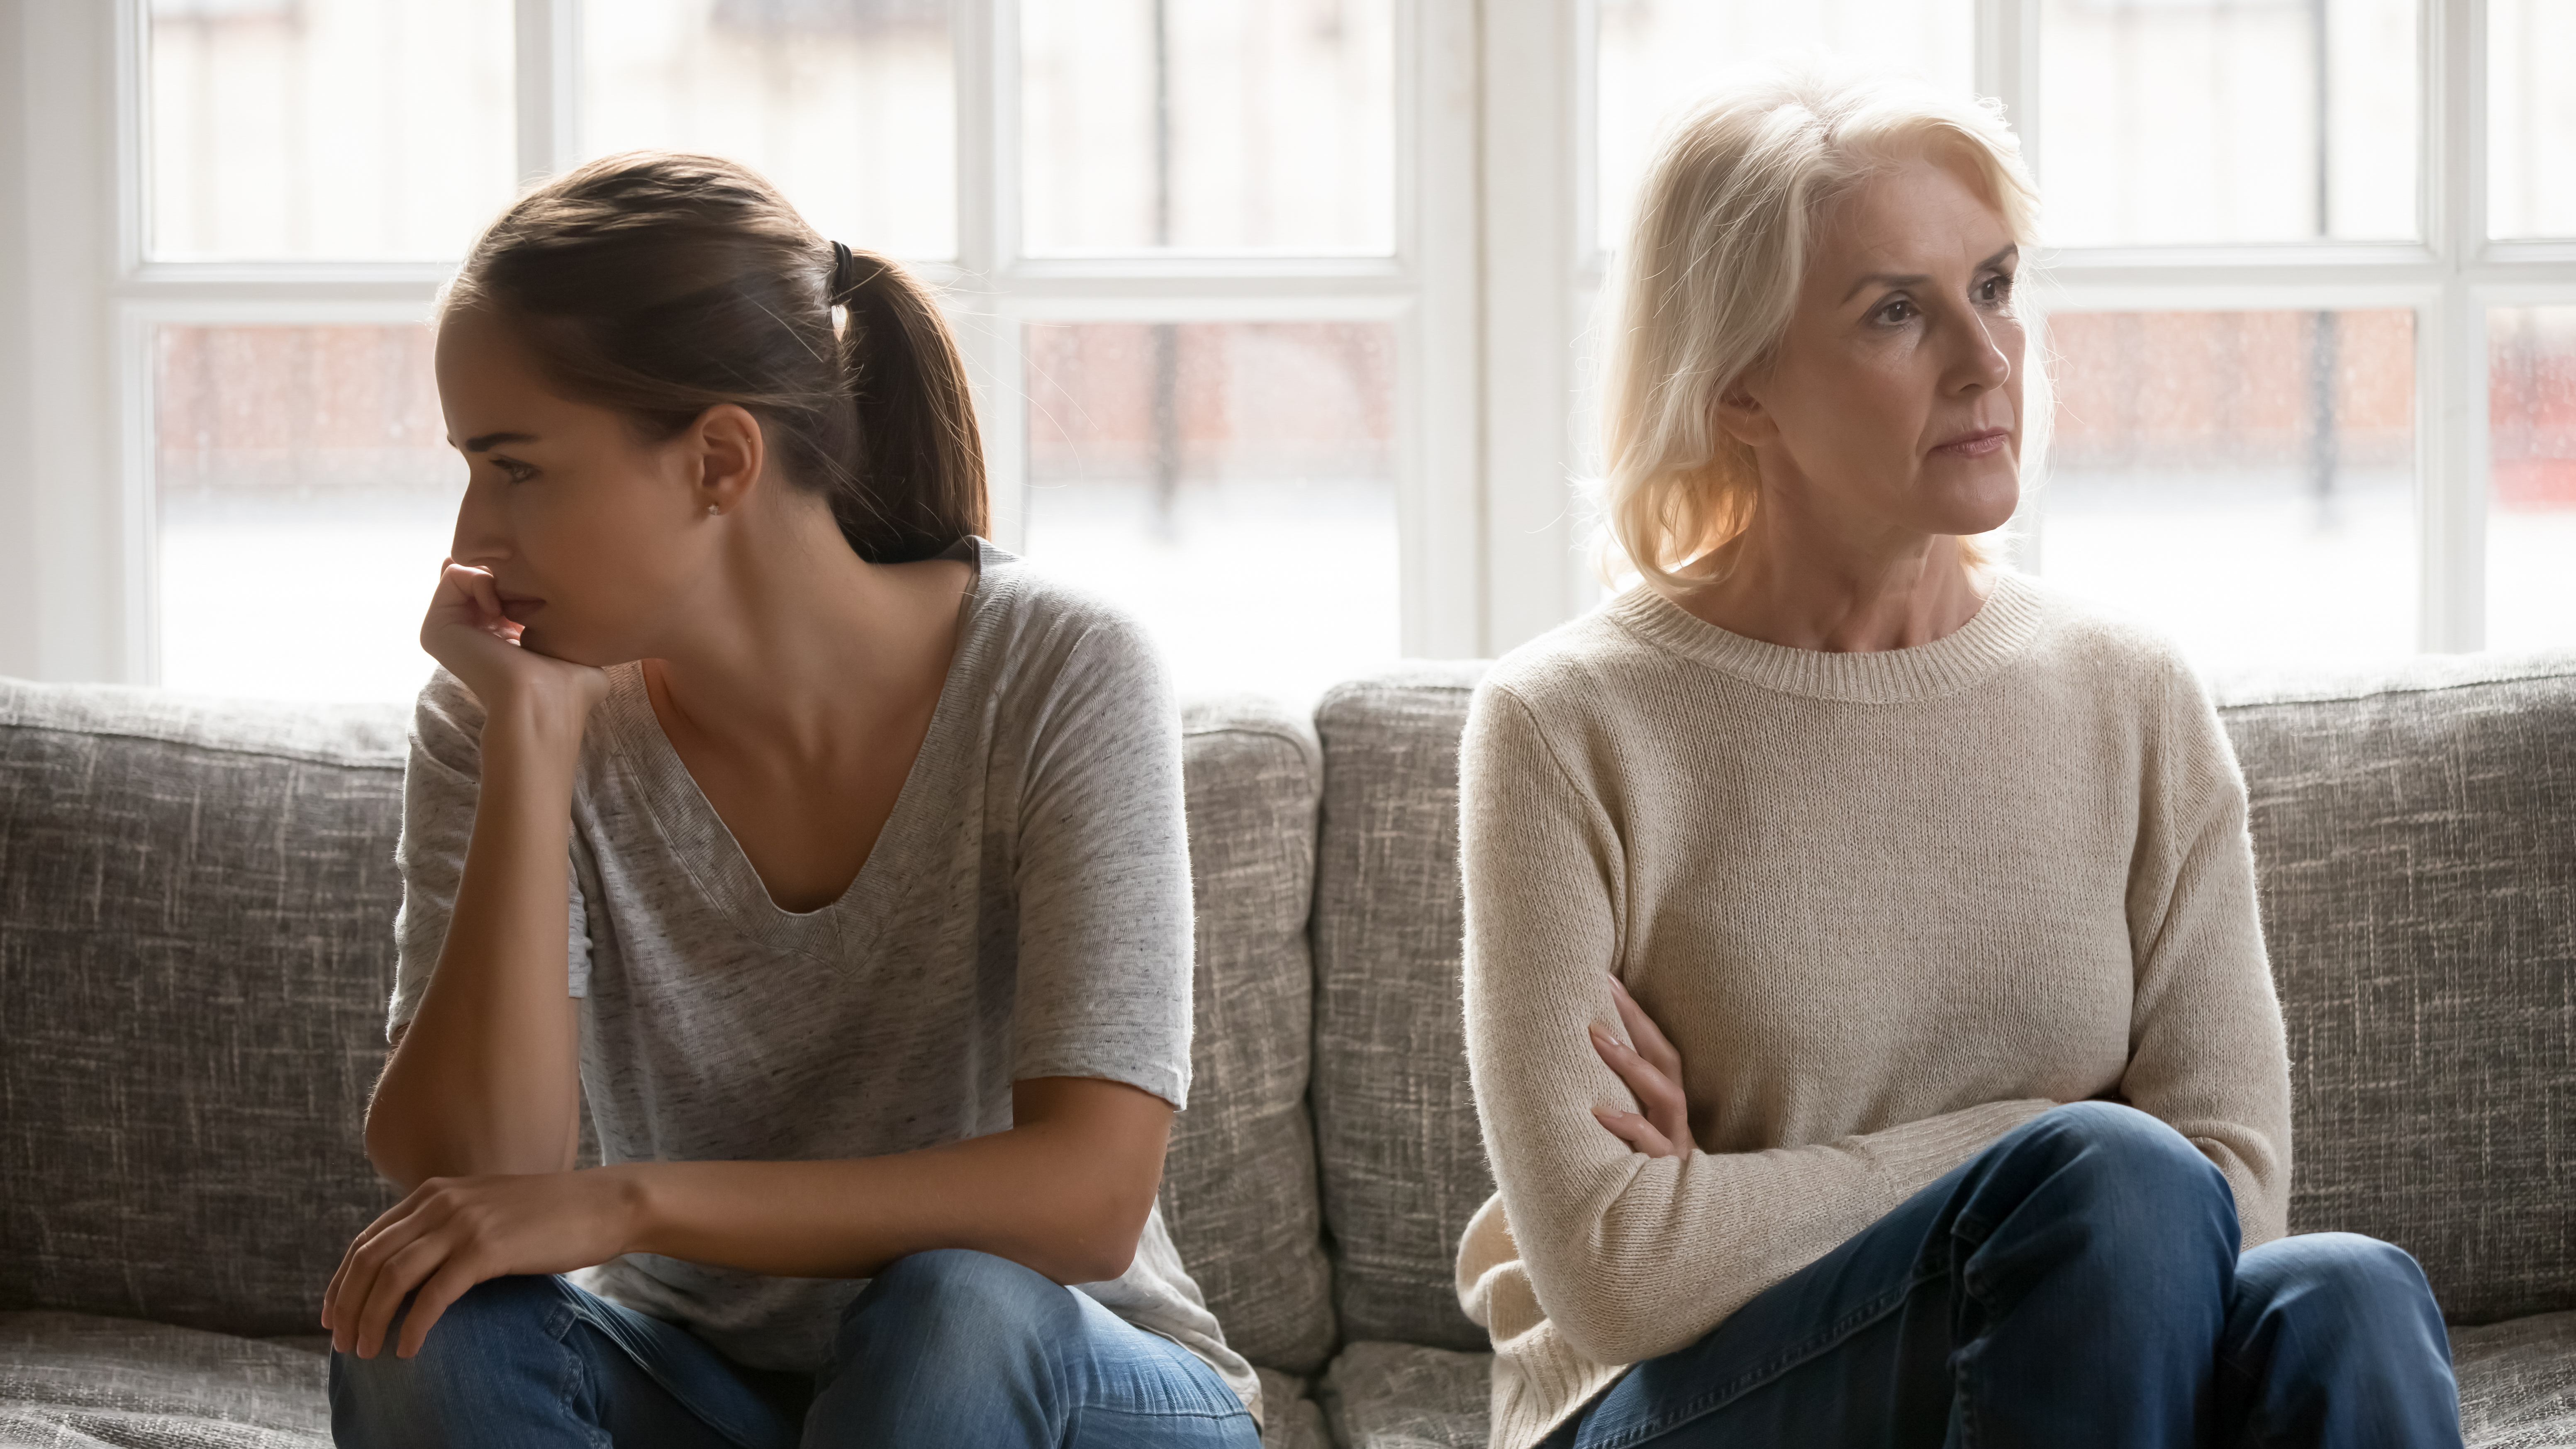 Young woman and older woman sitting on a couch not talking | Source: Shutterstock